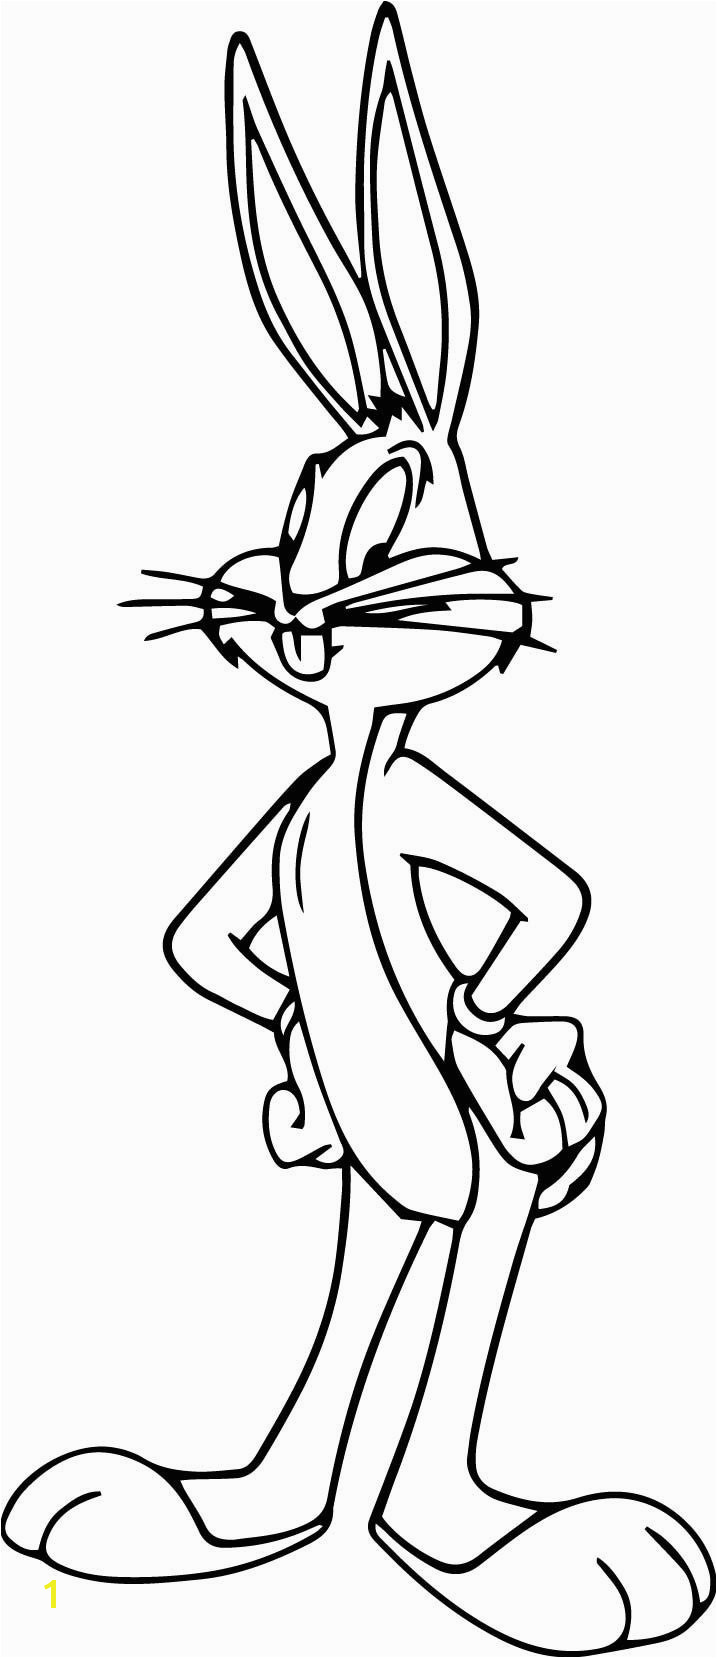 Bugs Bunny Coloring Page wecoloringpage Pinterest